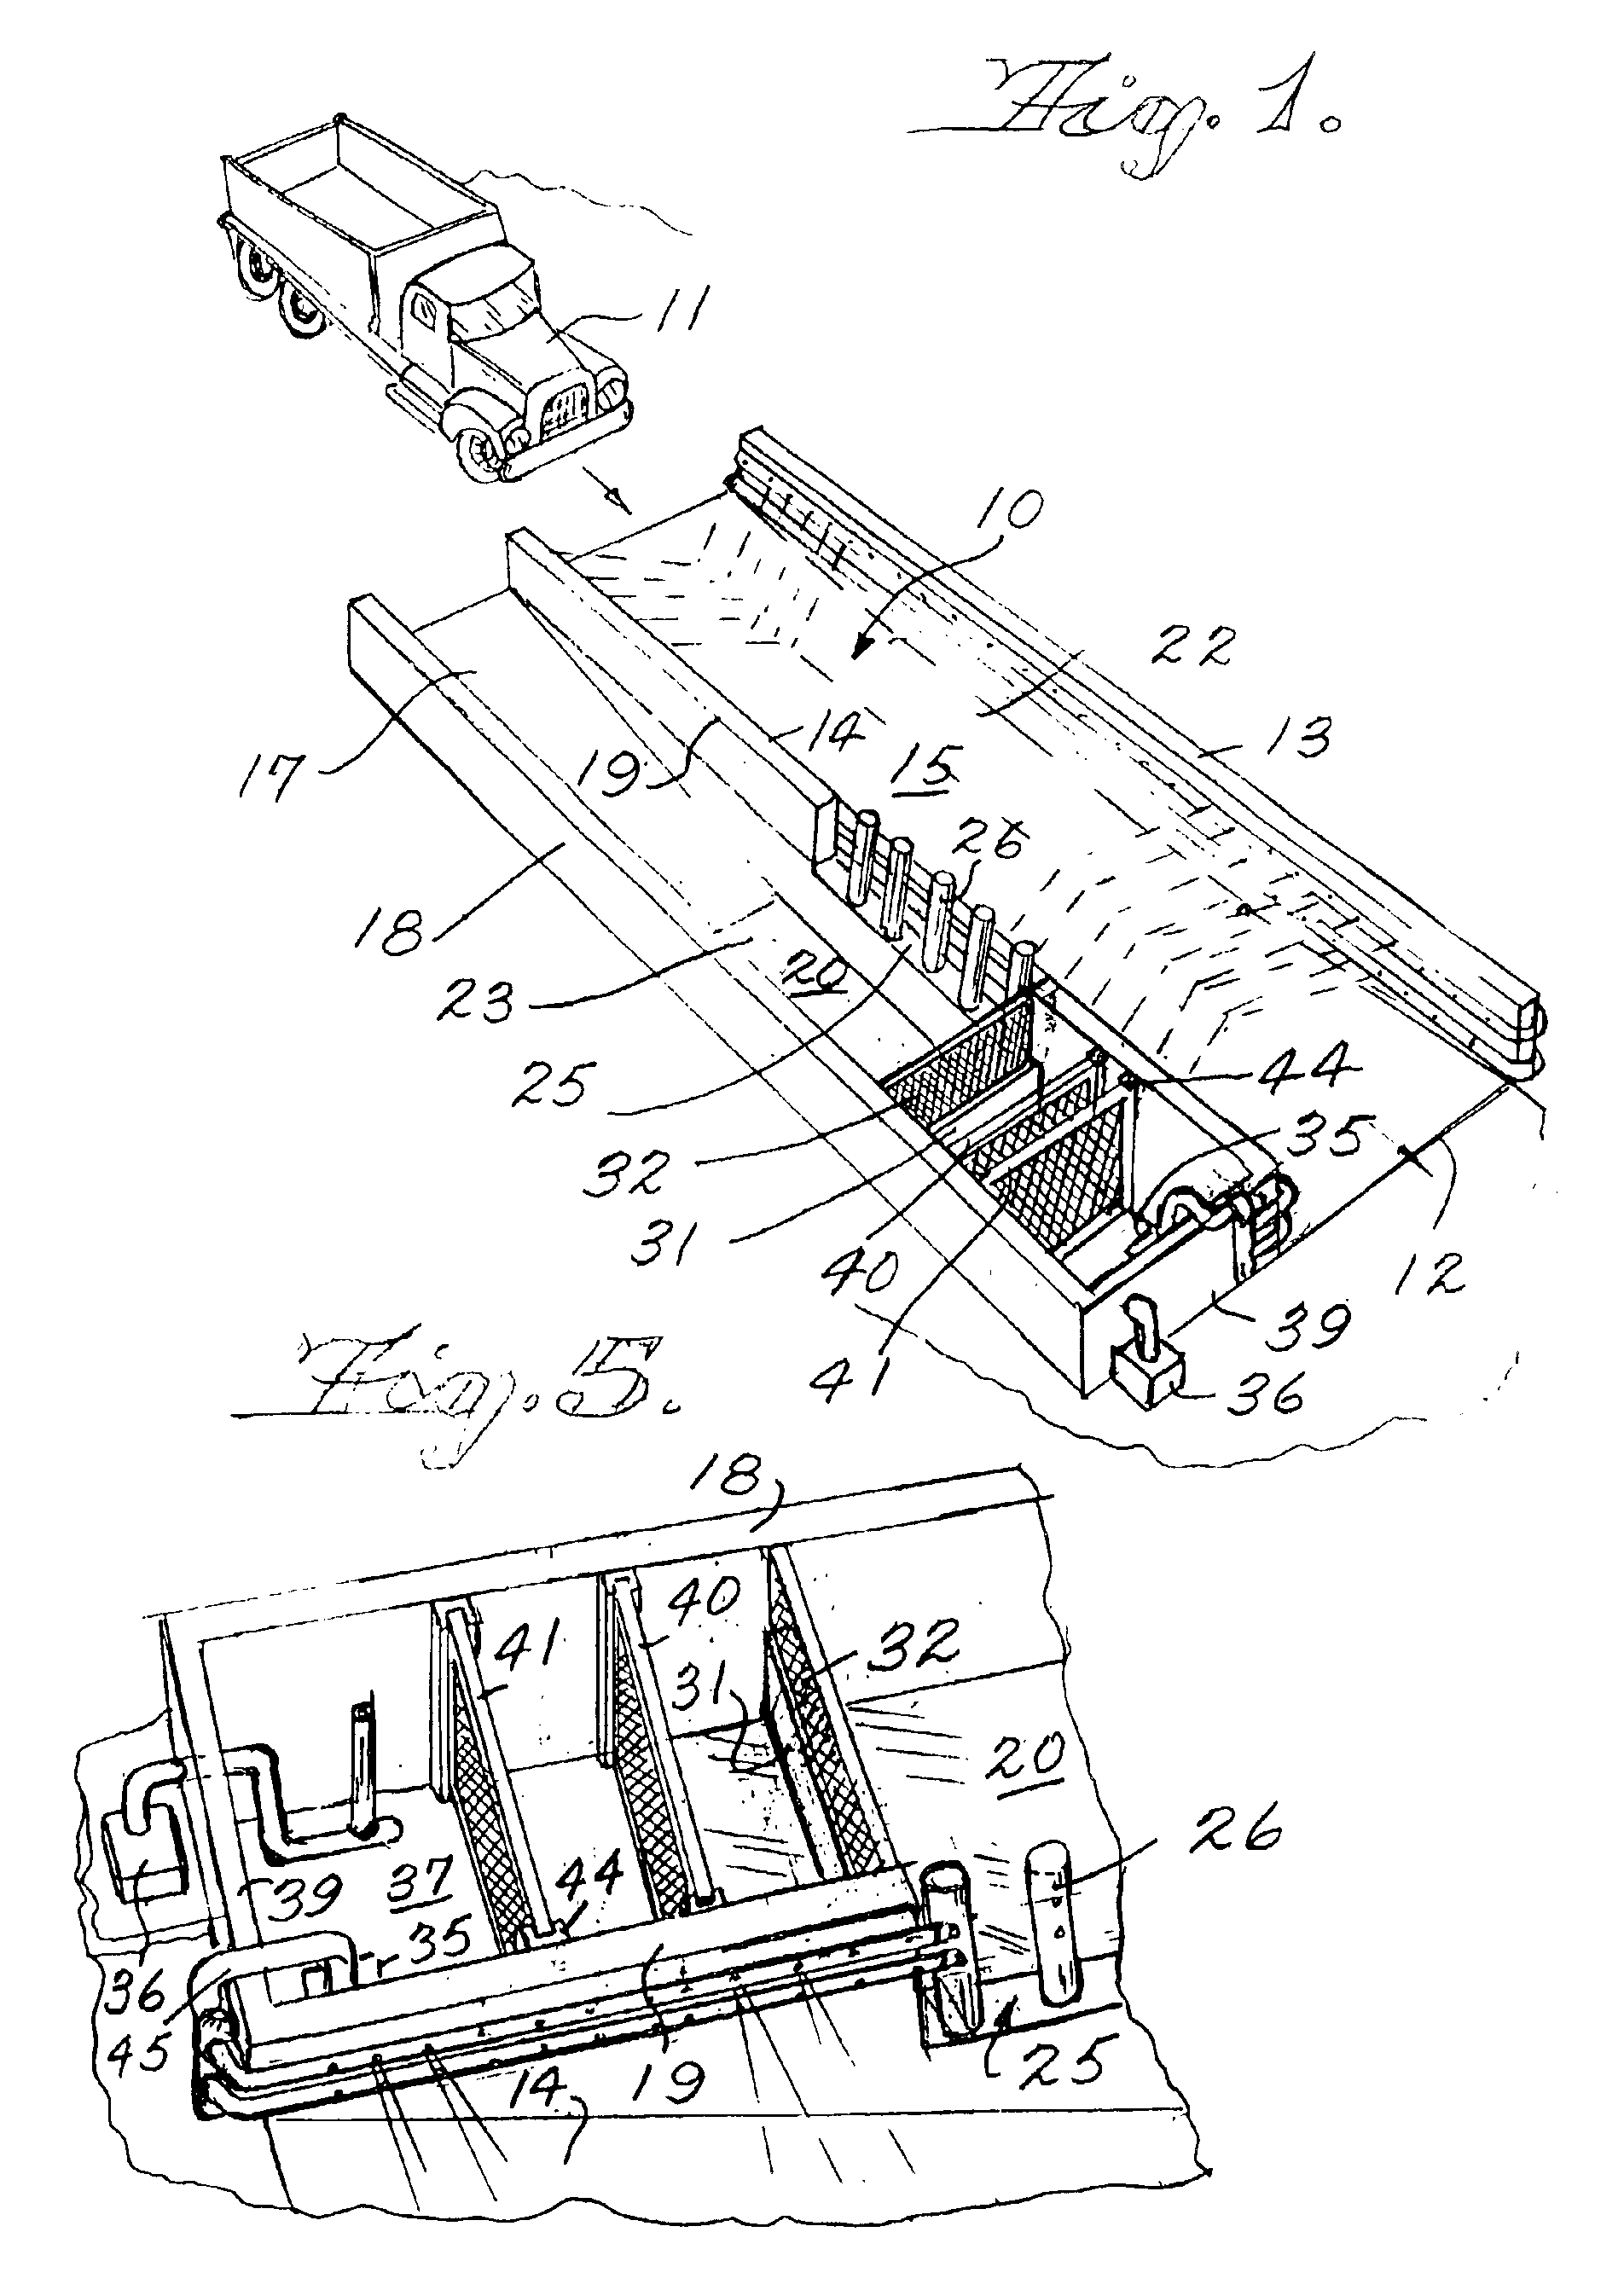 Apparatus for washing vehicle tires and wheels